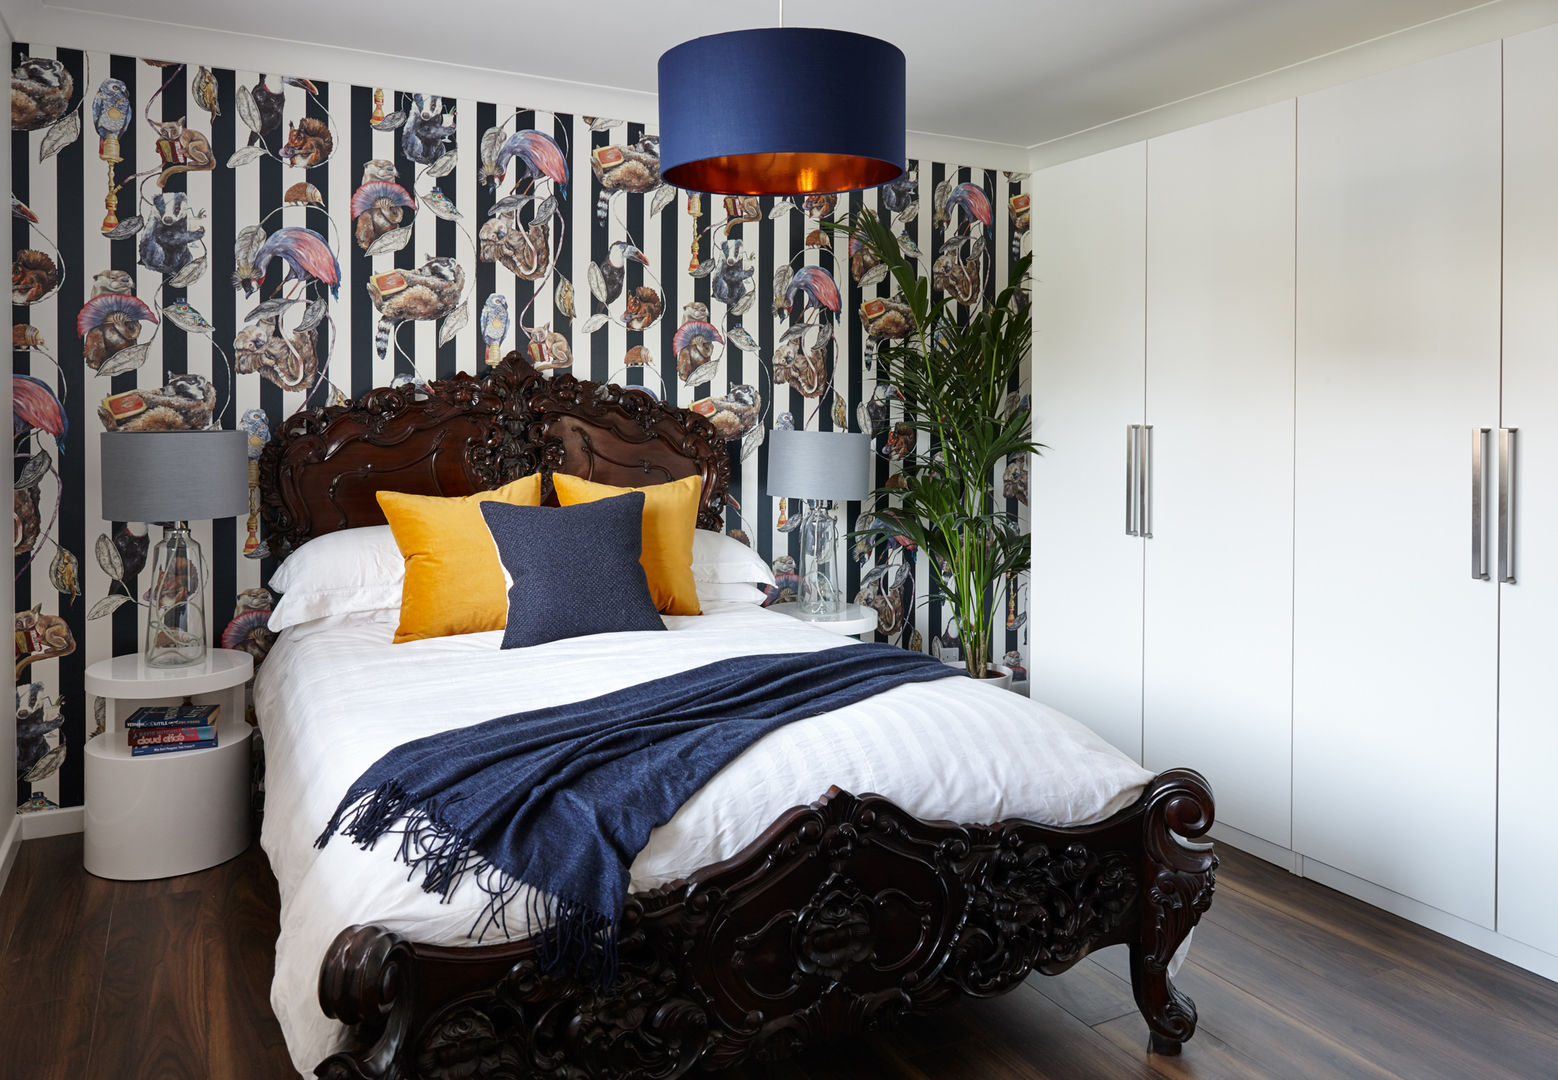 Virginia Water Apartment - Surrey Bhavin Taylor Design Phòng ngủ phong cách hiện đại bedroom,bed,rococo style,wallpaper,anaimals,blue,yellow,wardrobes,storage,plant,bedding